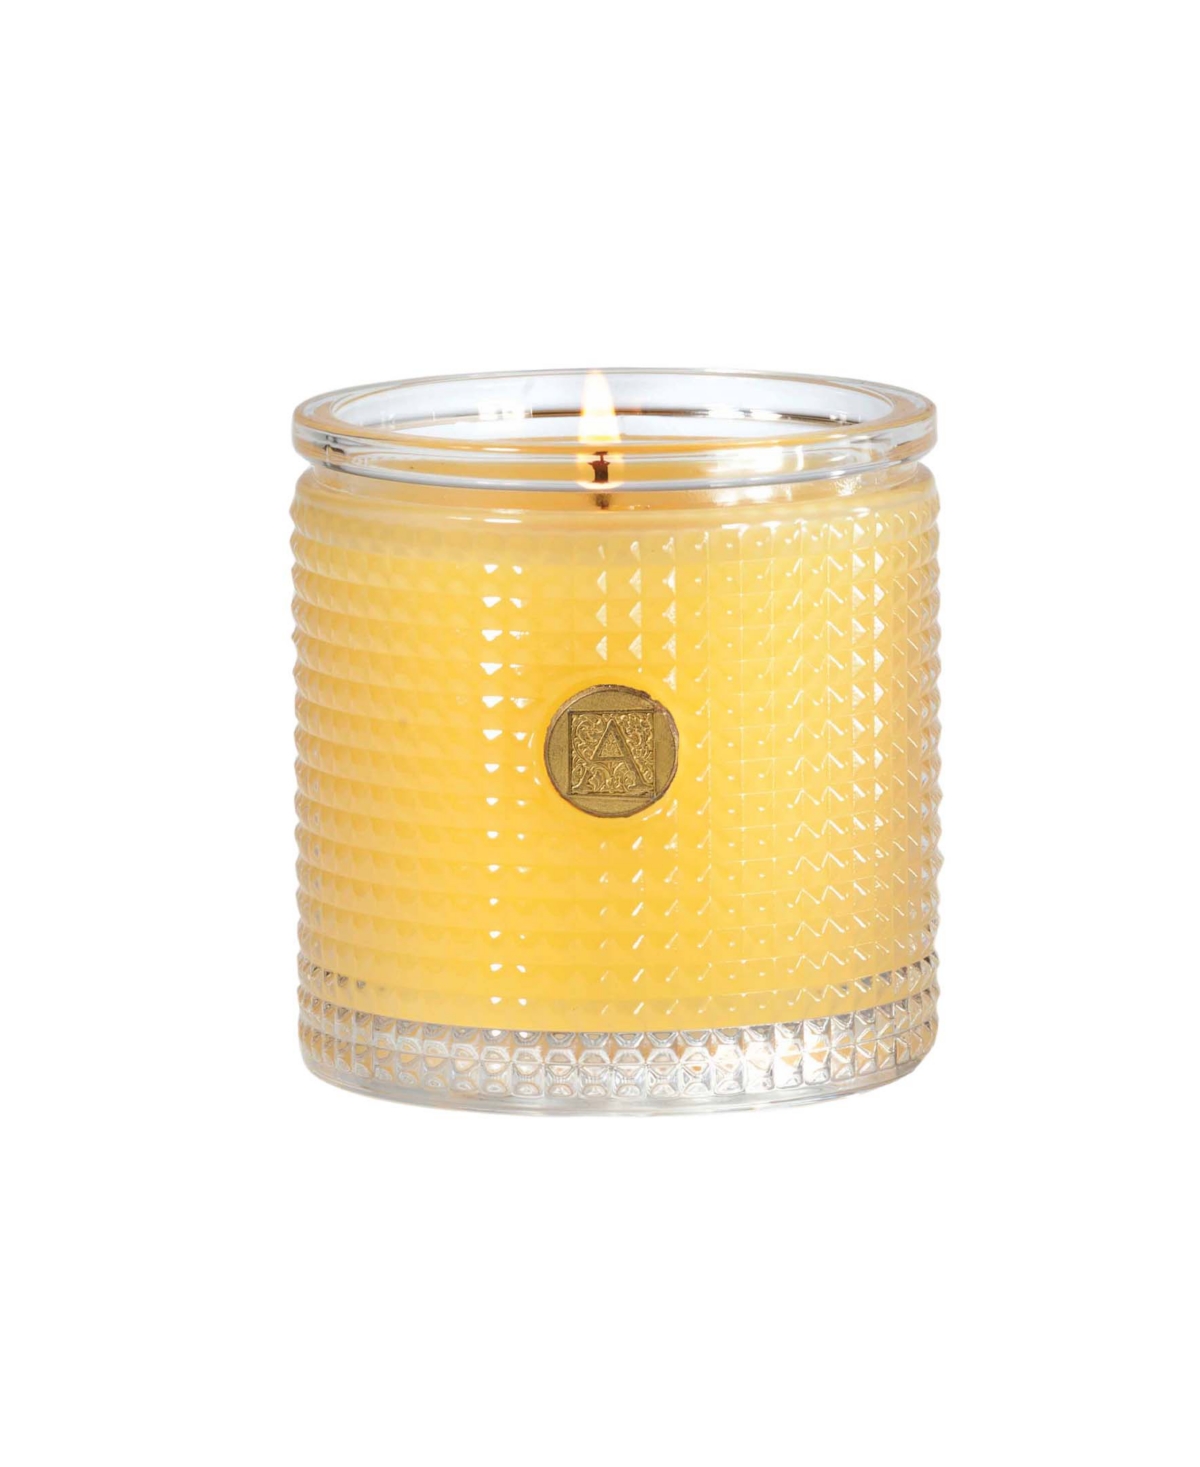 10559997 Aromatique Agave Pineapple Textured Candle sku 10559997